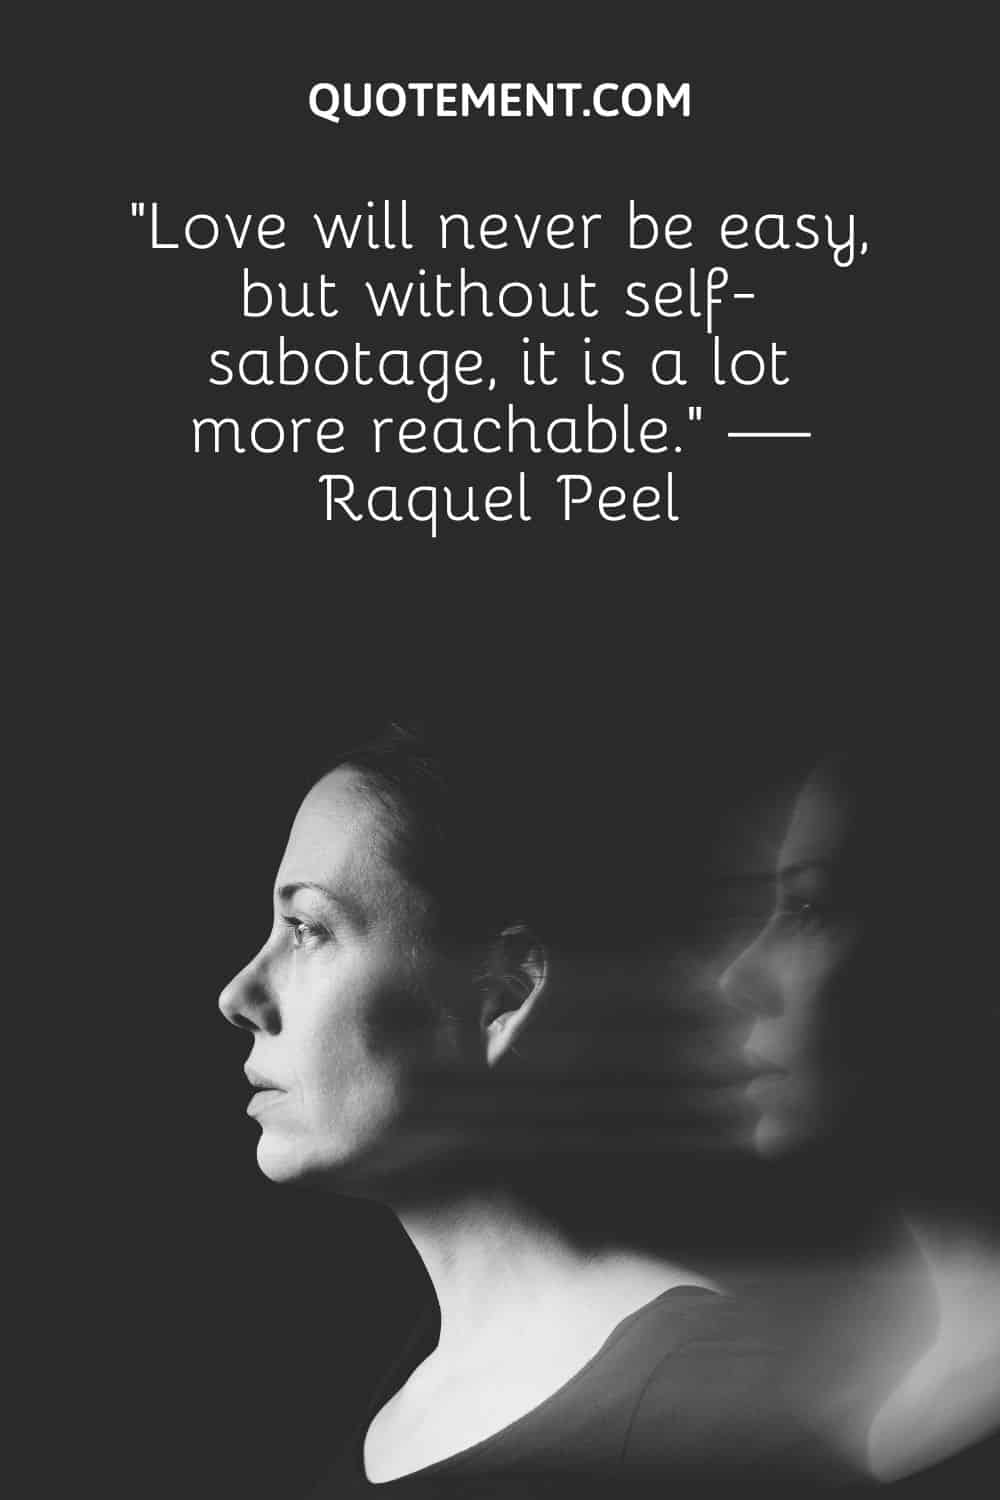 “Love will never be easy, but without self-sabotage, it is a lot more reachable.” — Raquel Peel